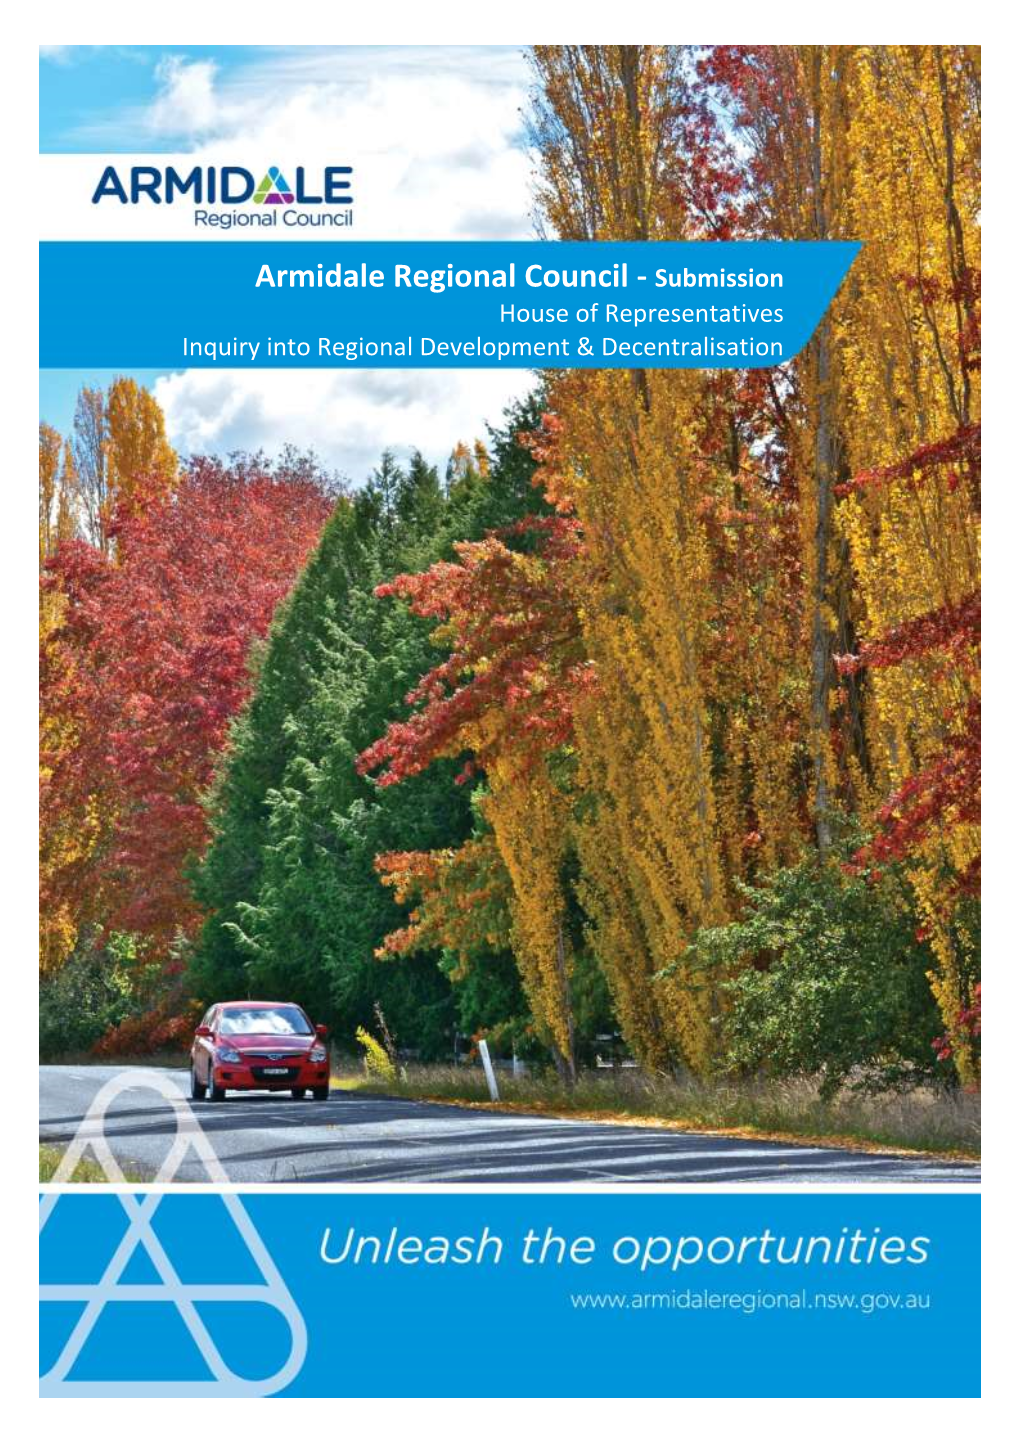 Armidale Regional Council - Submission House of Representatives Inquiry Into Regional Development & Decentralisation